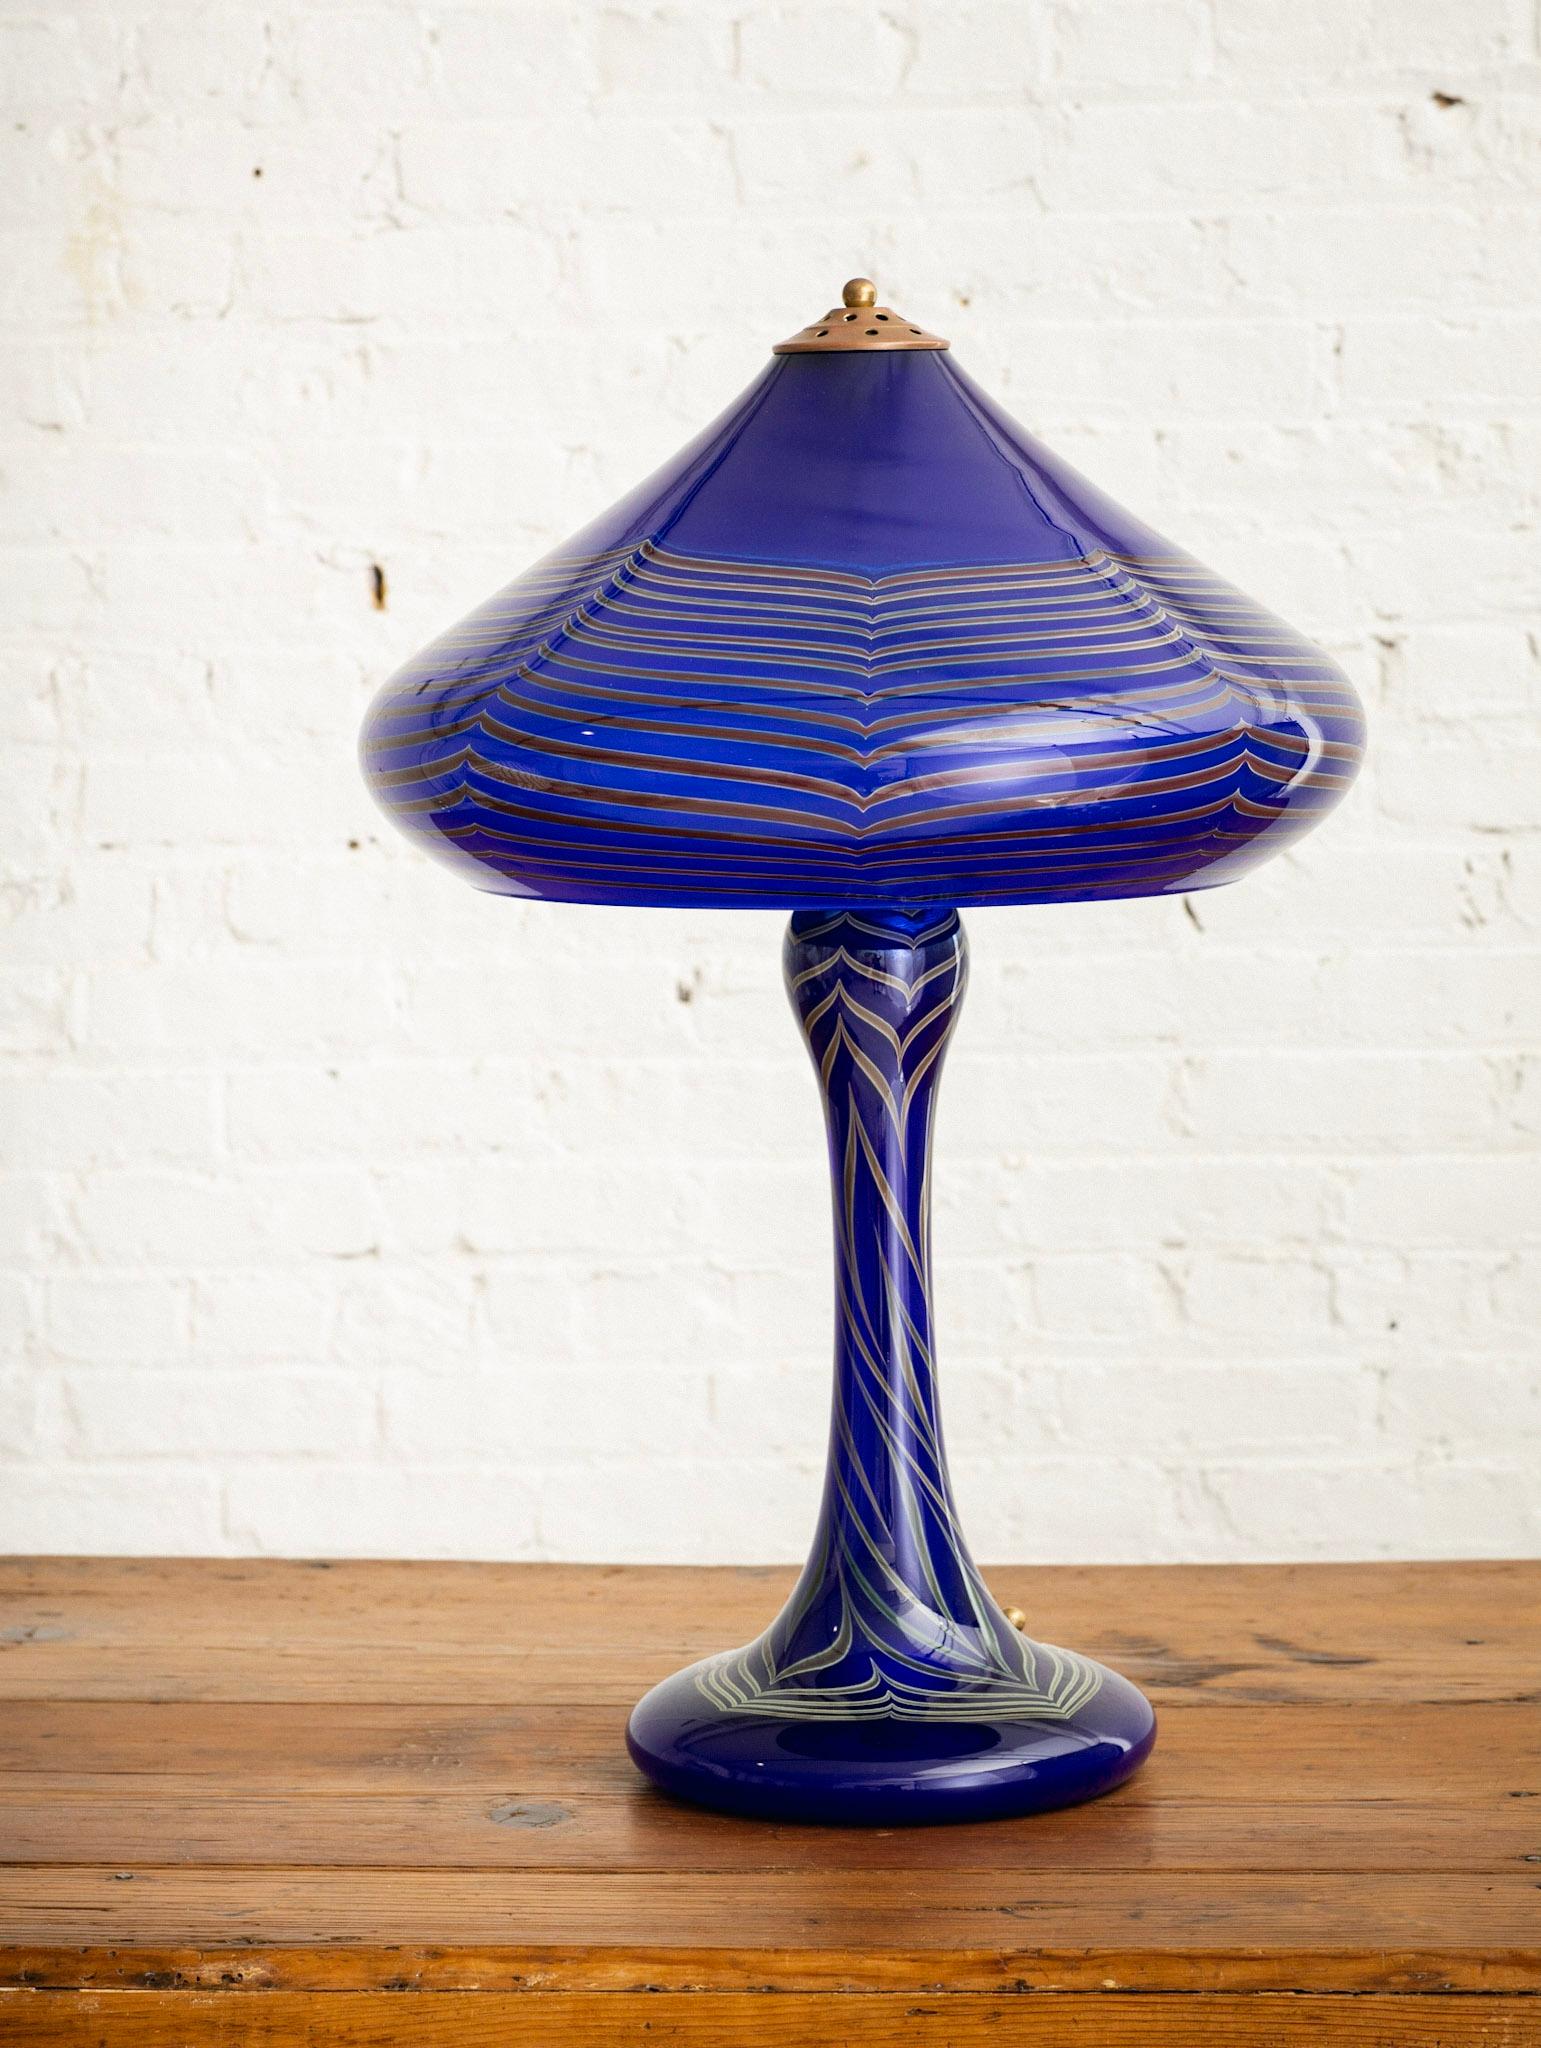 A hand blown glass table lamp by Joseph Clearman Studio. An upper glass shade is mounted to a glass bottom with brass hardware. Cobalt blue glass with a marbleized stripe detail. Art nouveau style silhouette. Upper shade is illuminated by three